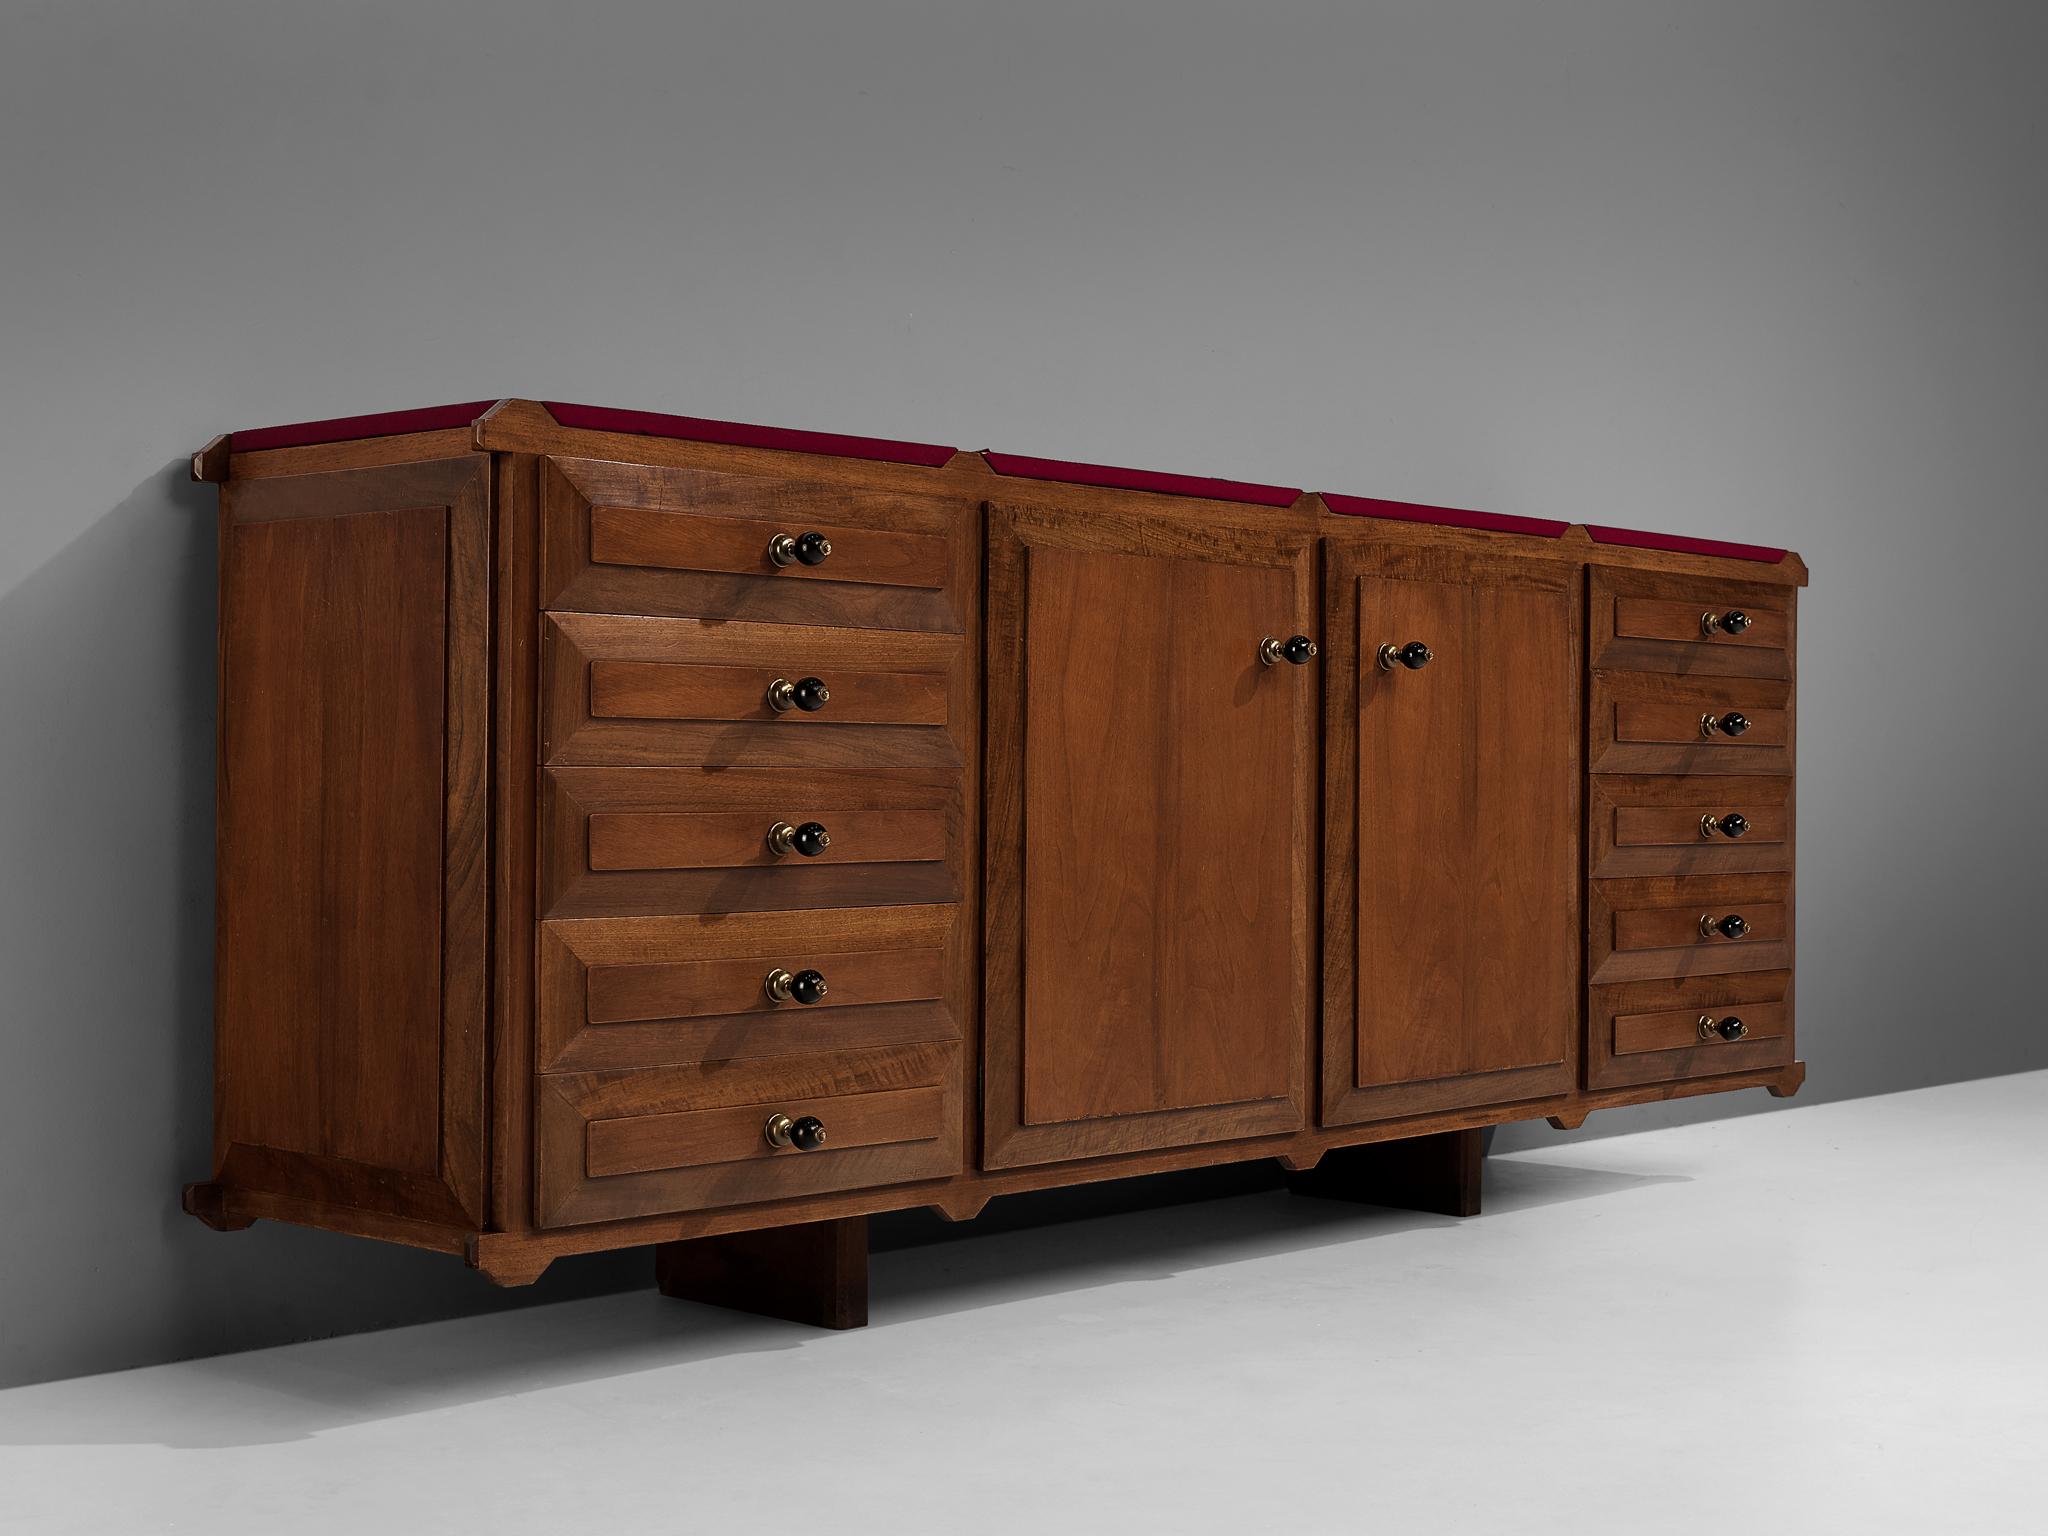 Italian Sideboard with Drawers in Walnut with Brass Handles For Sale 3